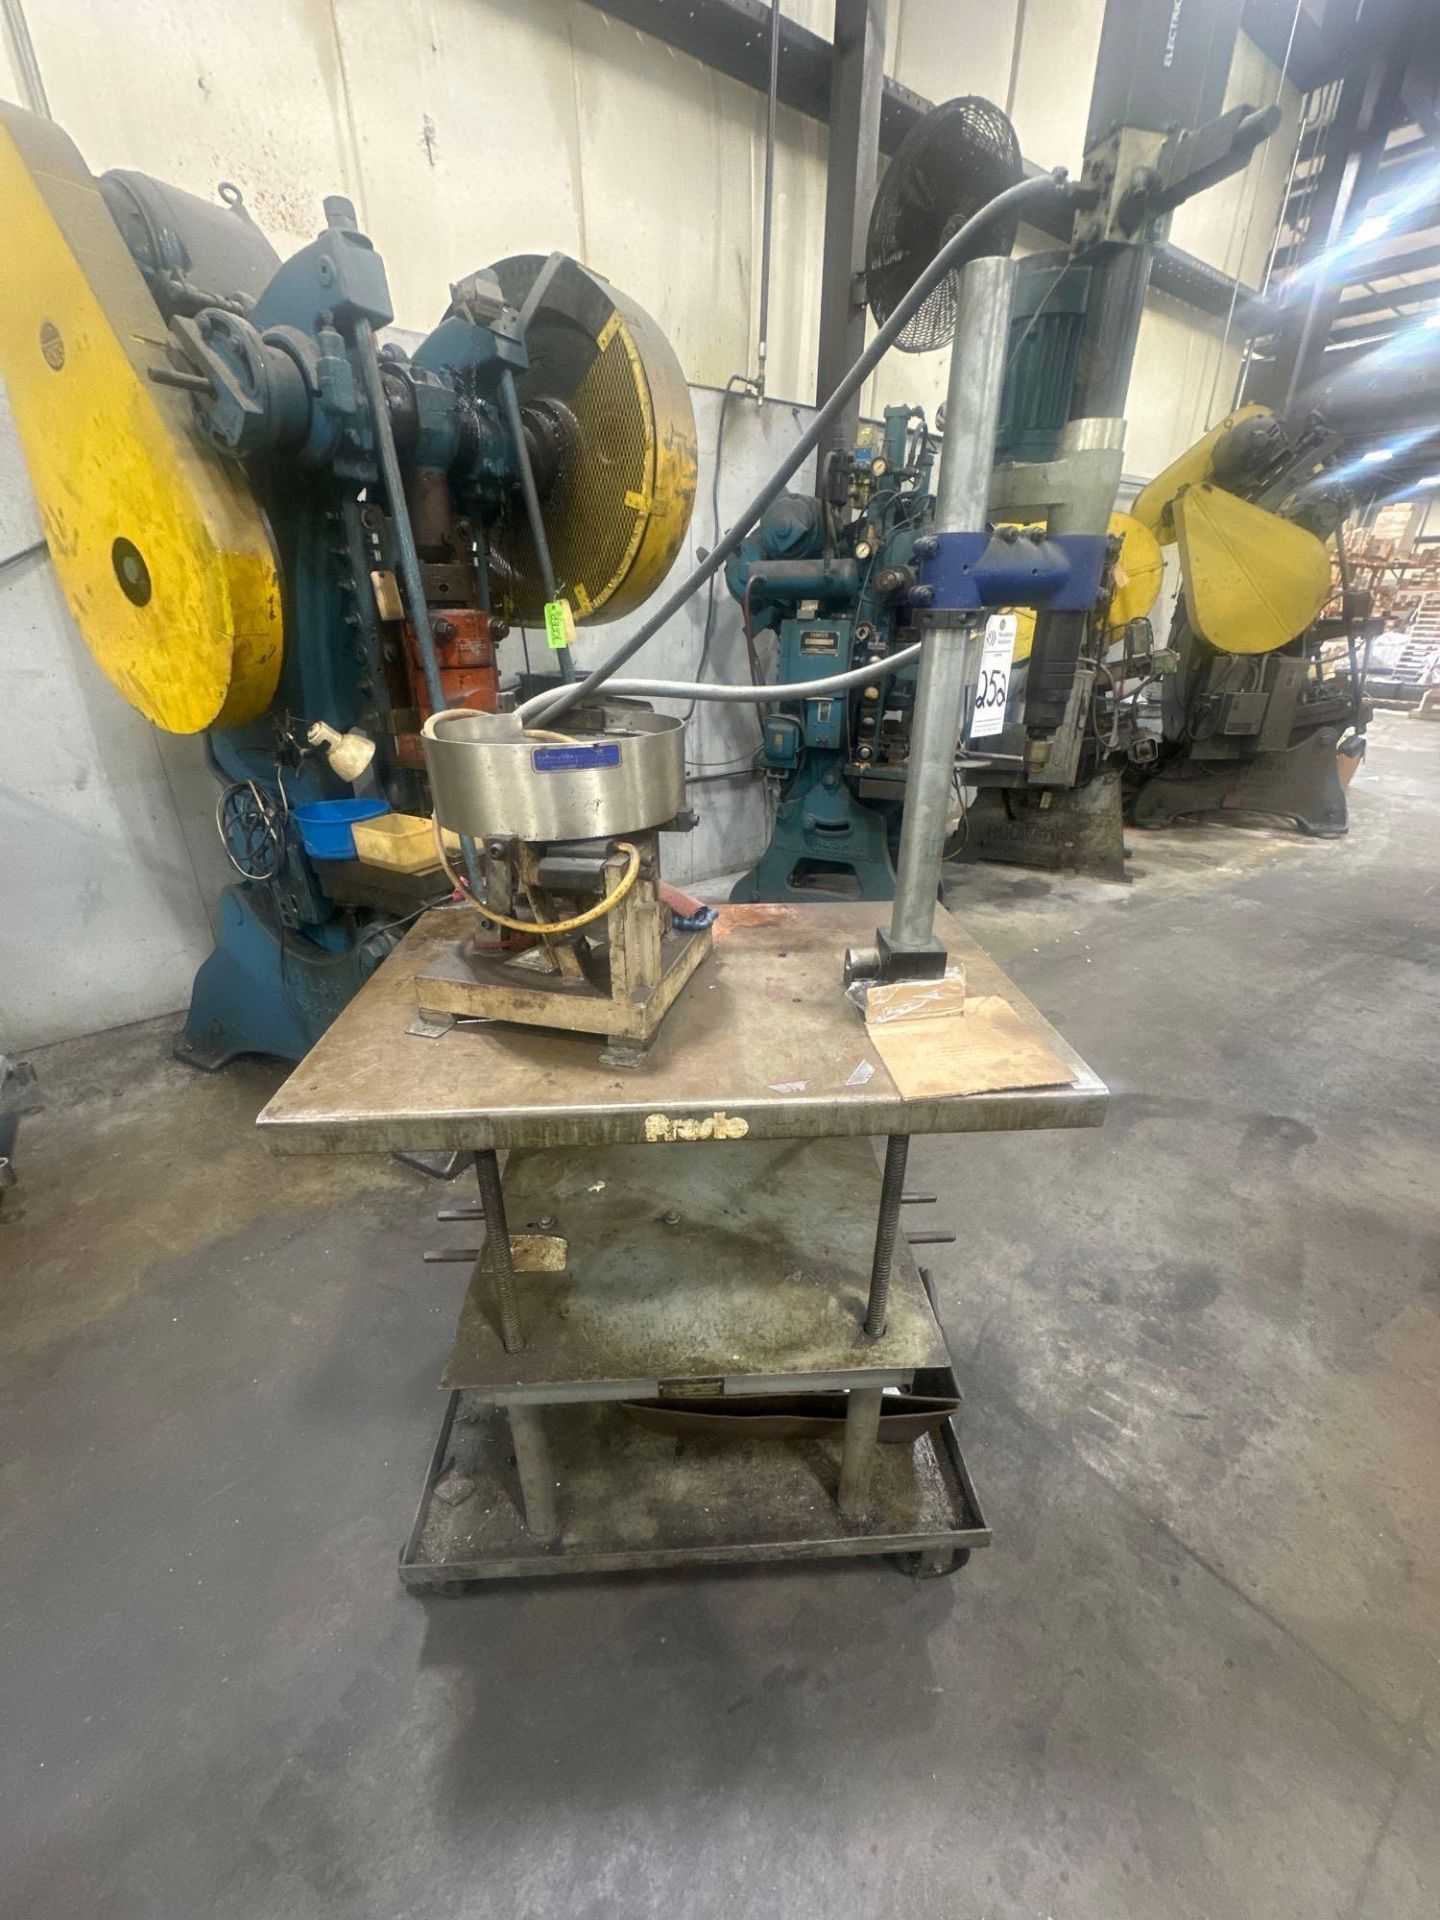 DRILL PRESS AND FEEDER ON ROLLING TABLE